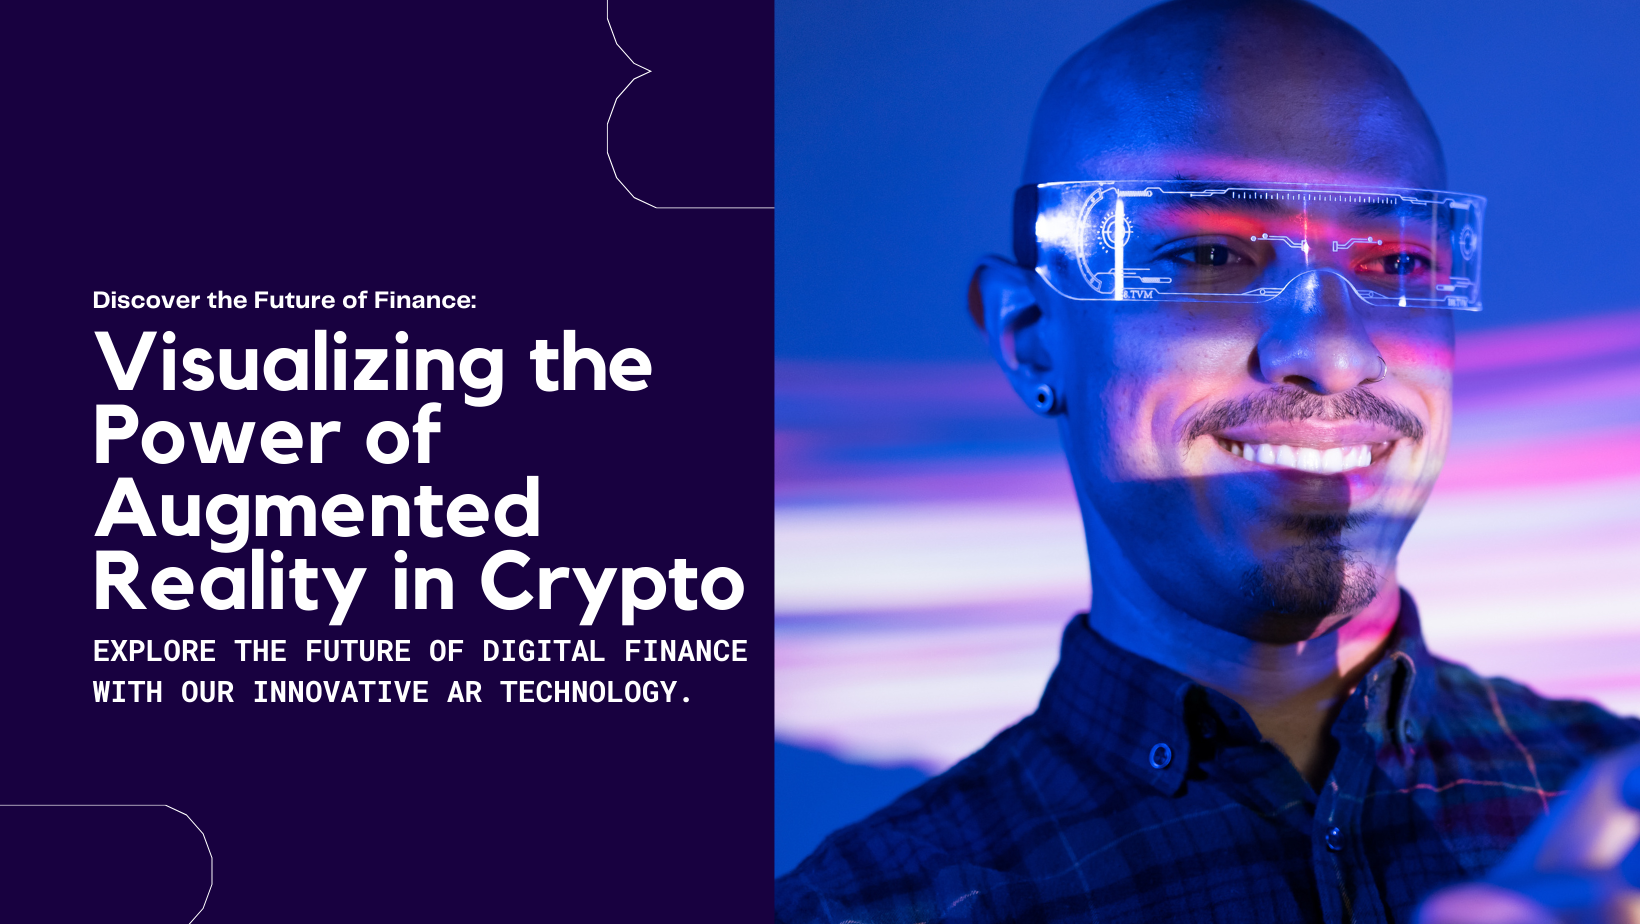 Augmented Reality in Crypto: Visualizing the Future of Digital Finance